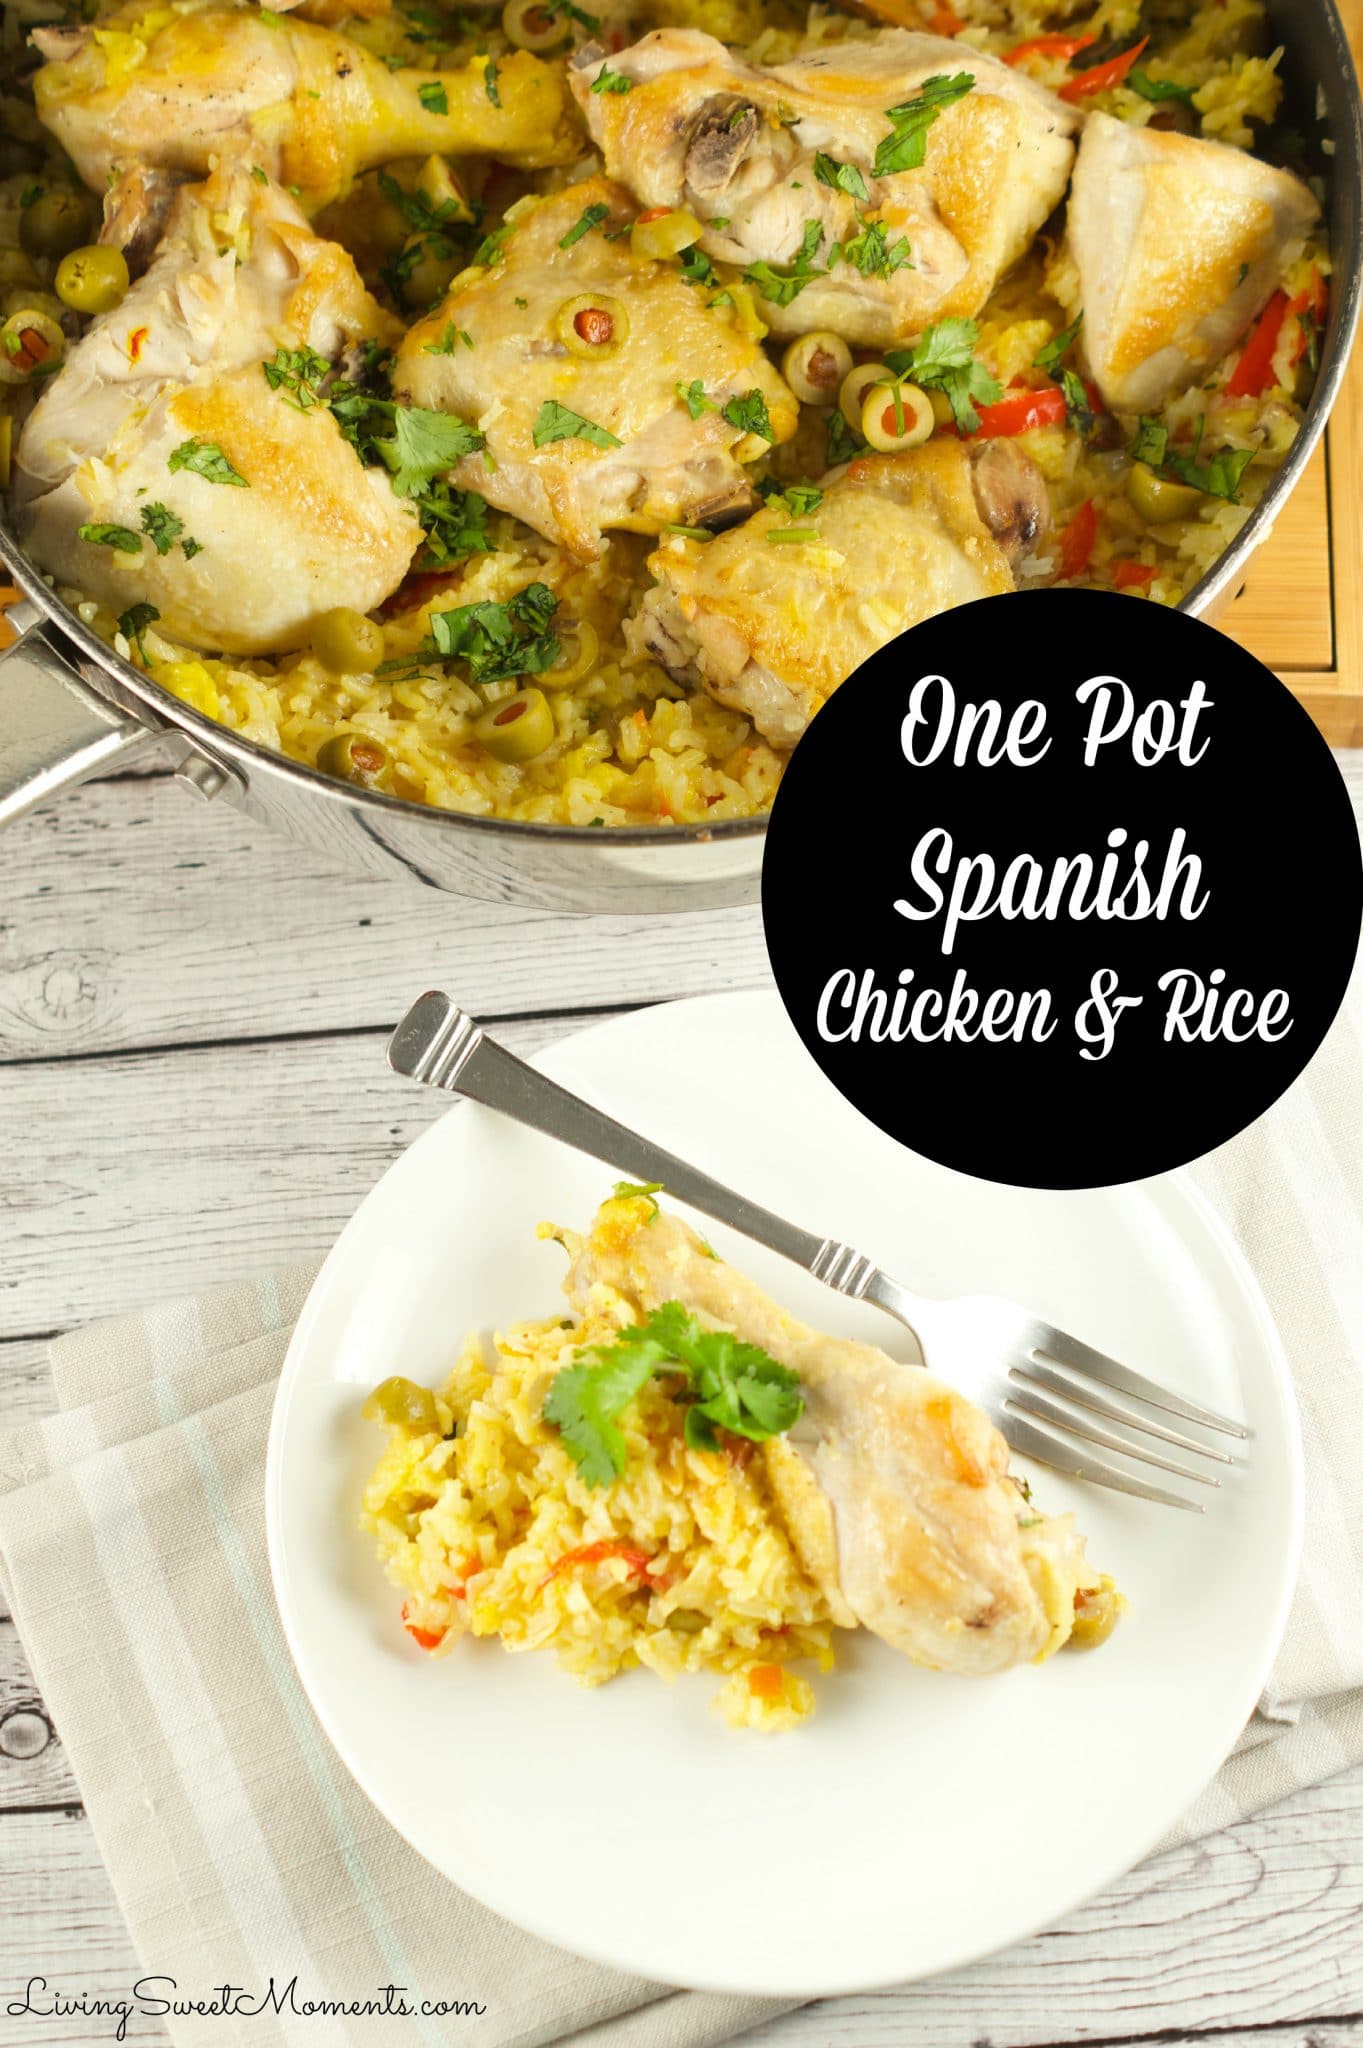 One Pot Spanish Chicken And Rice - Delicious and simple chicken dinner recipe flavored with saffron, veggies and stock that your family will love. I love it